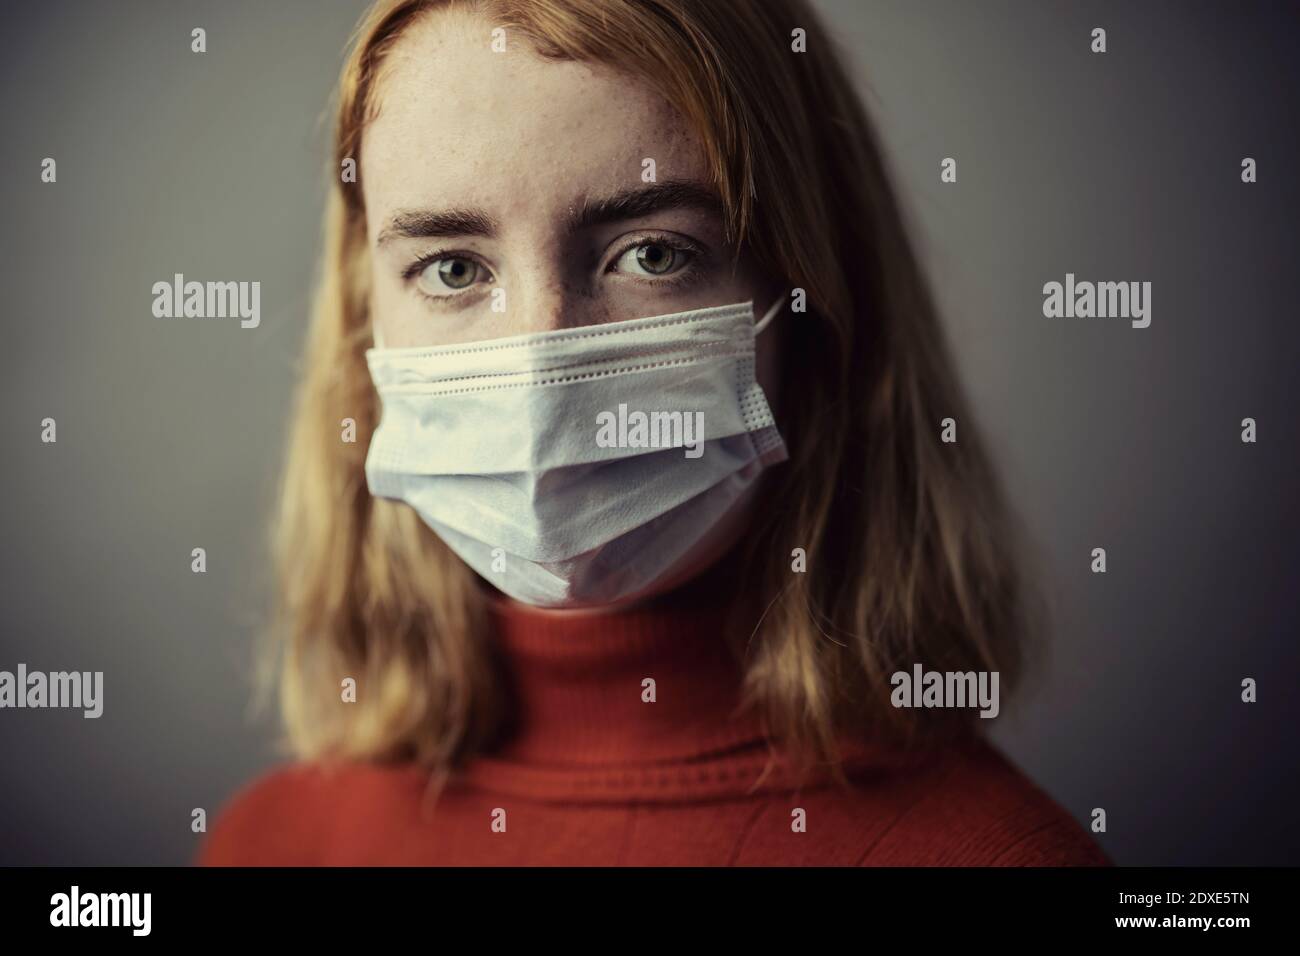 Teenage girl wearing protective face mask while standing against gray background Stock Photo